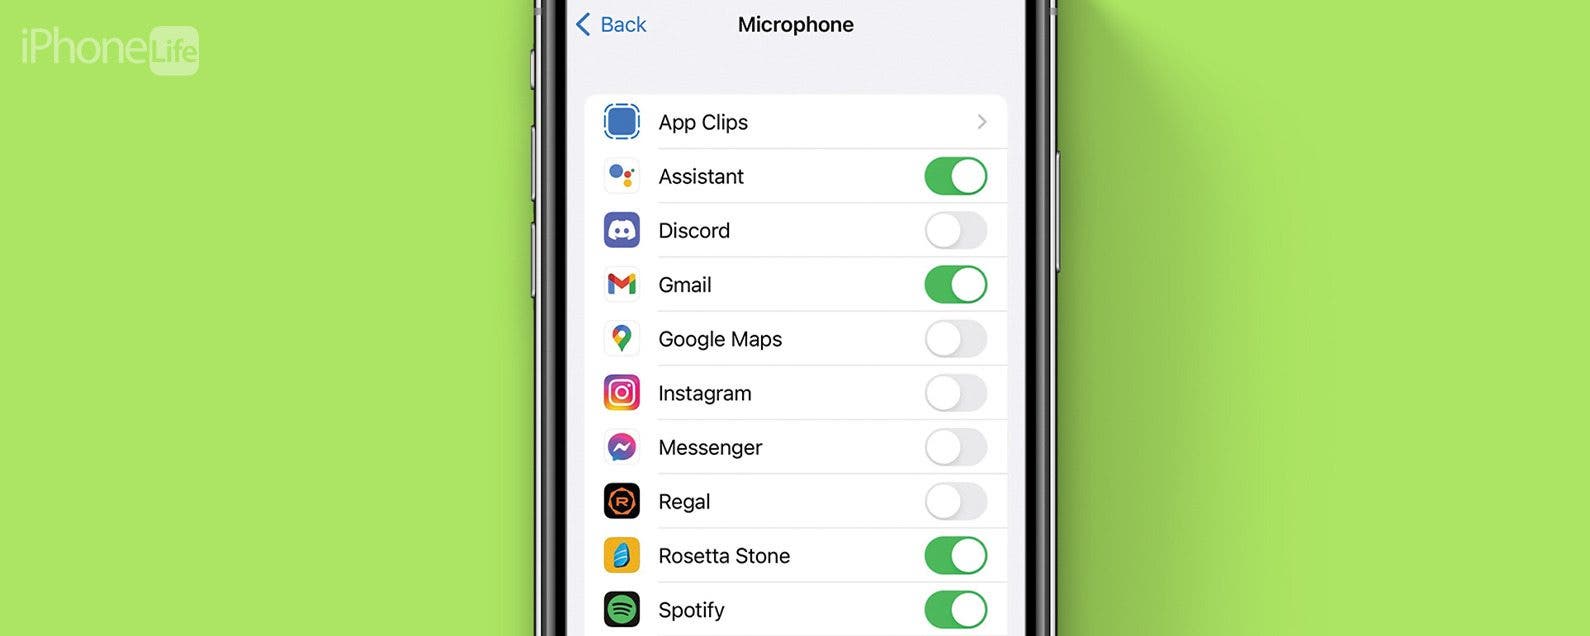 EZ Microphone : Use your iphone as a microphone.